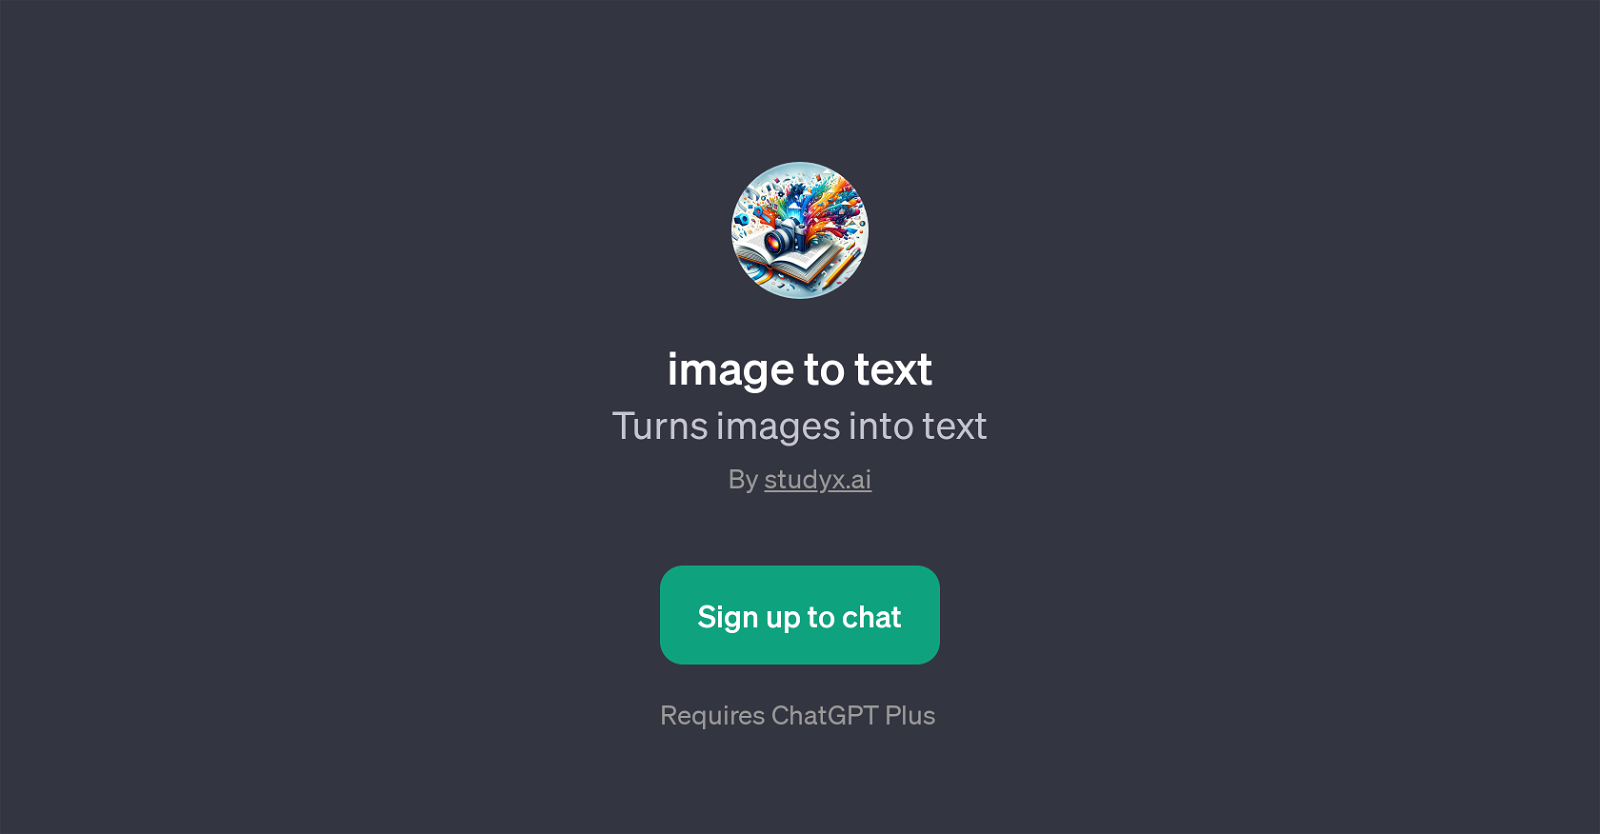 image to text website